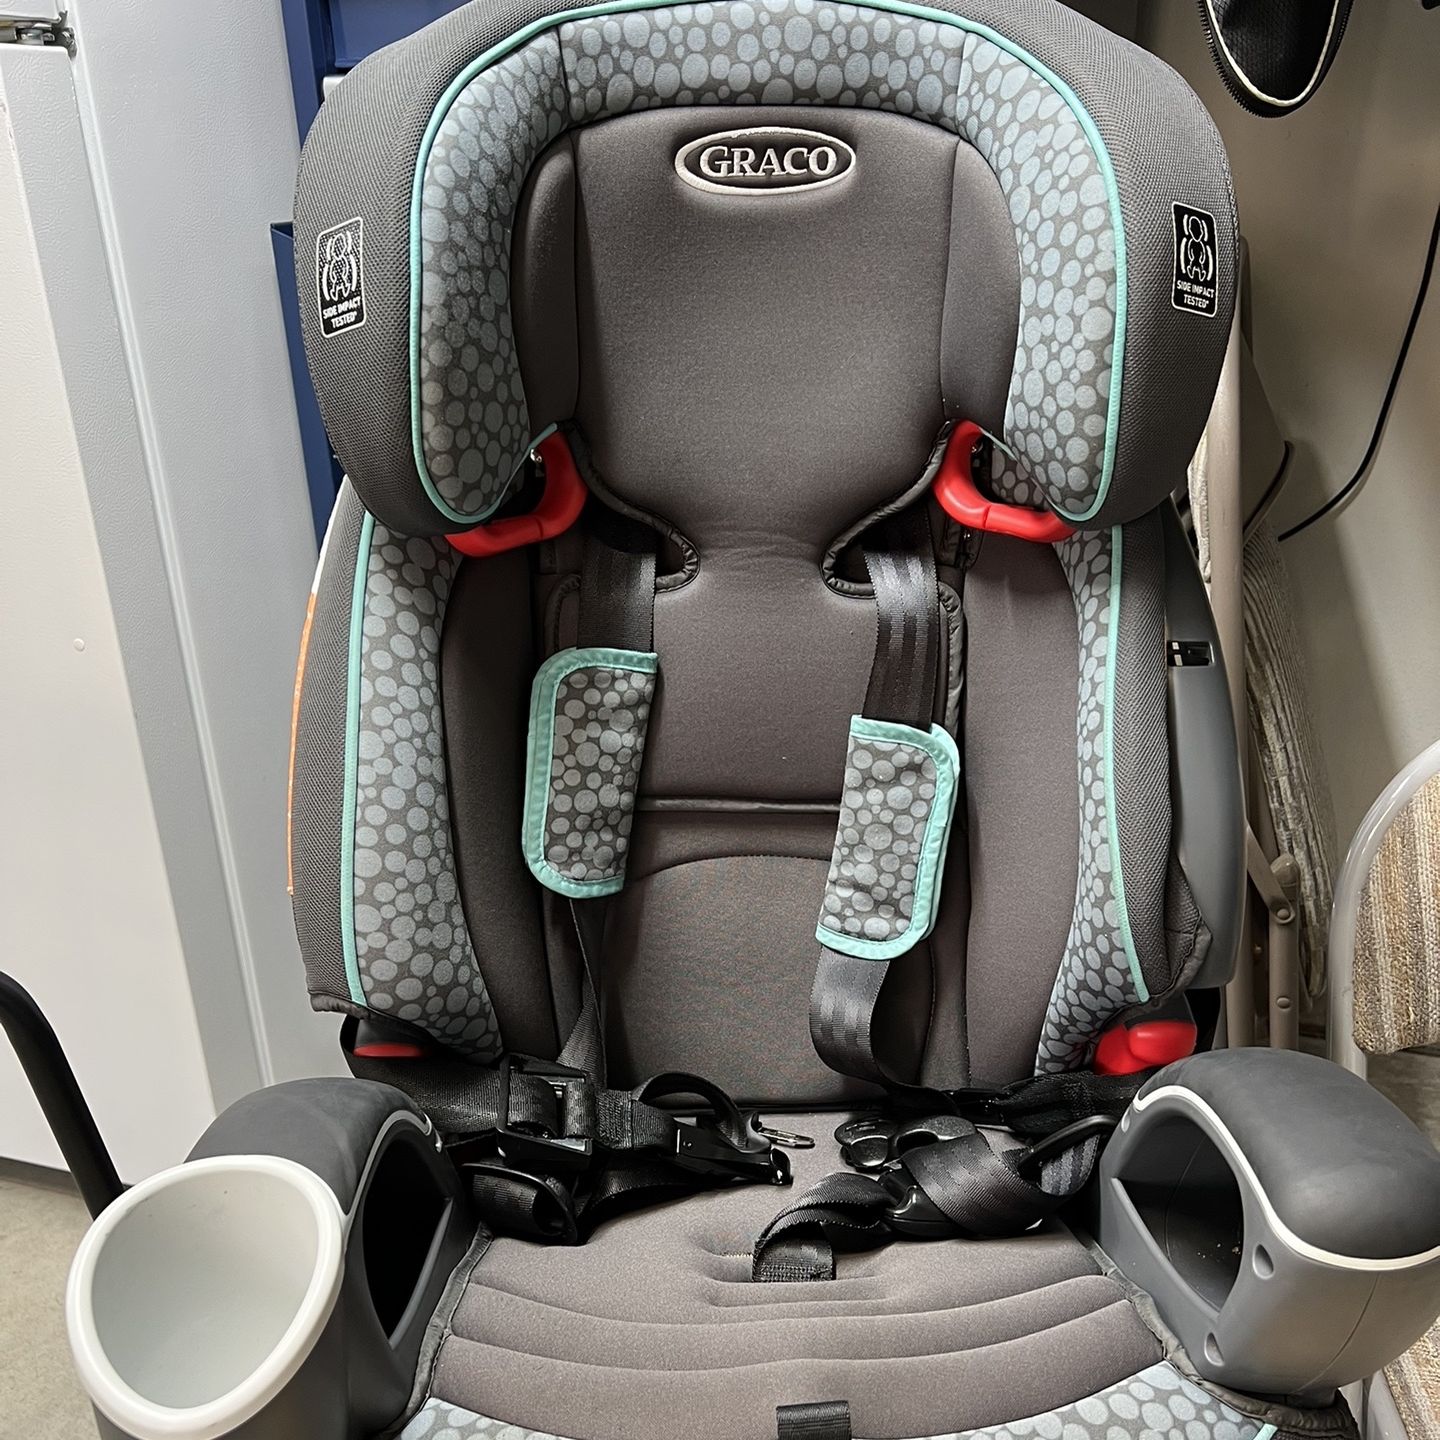 New / Open Box - Graco Slim fit 3 In 1 Convertible Car Seat for Sale in  Anaheim, CA - OfferUp